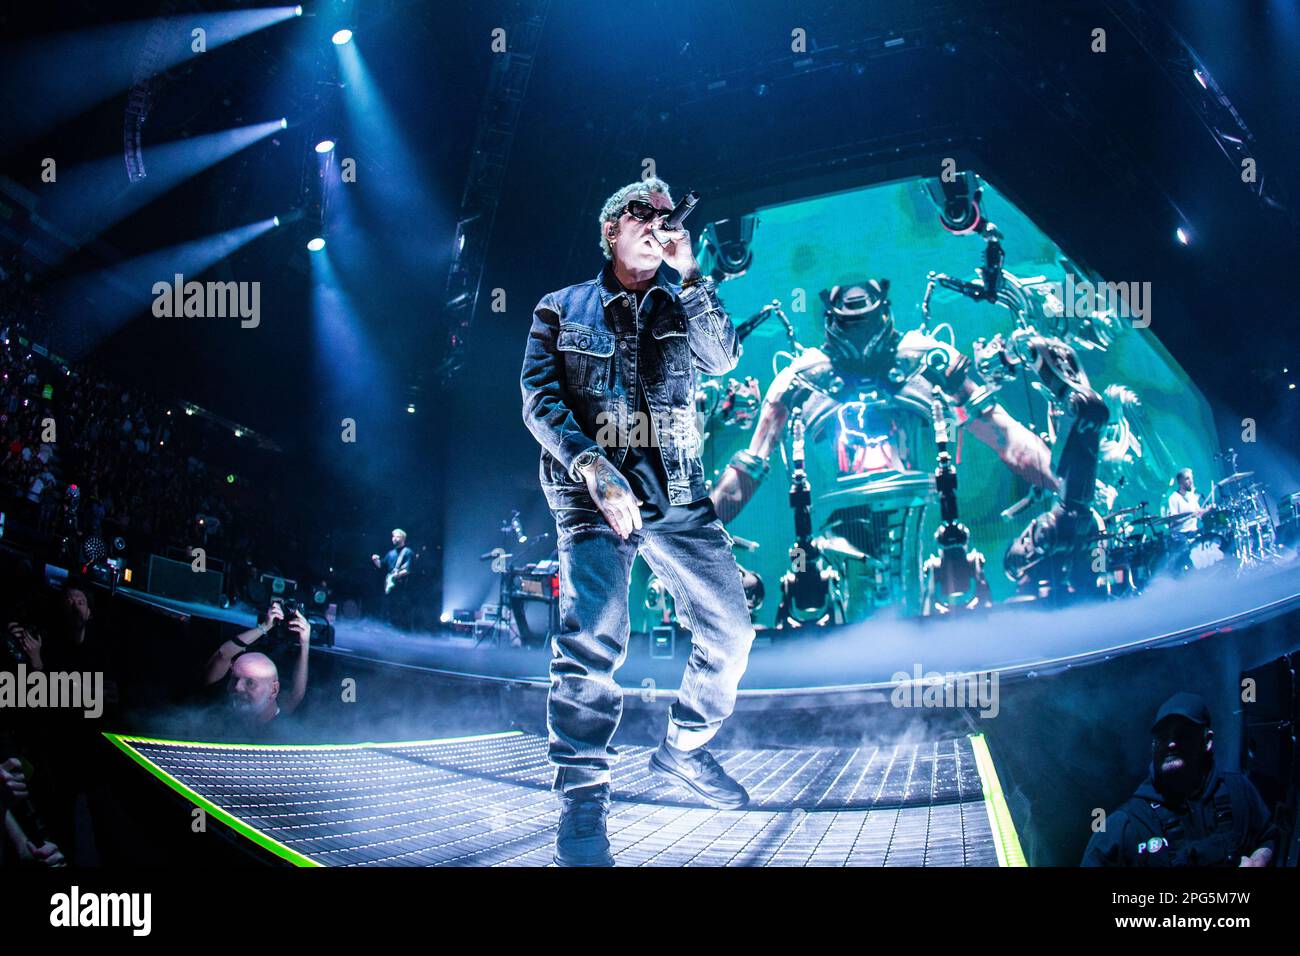 Milan Italy. 20 March 2023. The Italian rapper and actor Maurizio Pisciottu known professionally as SALMO performs live on stage at Mediolanum Forum during the 'Flop Tour 2023'. Stock Photo